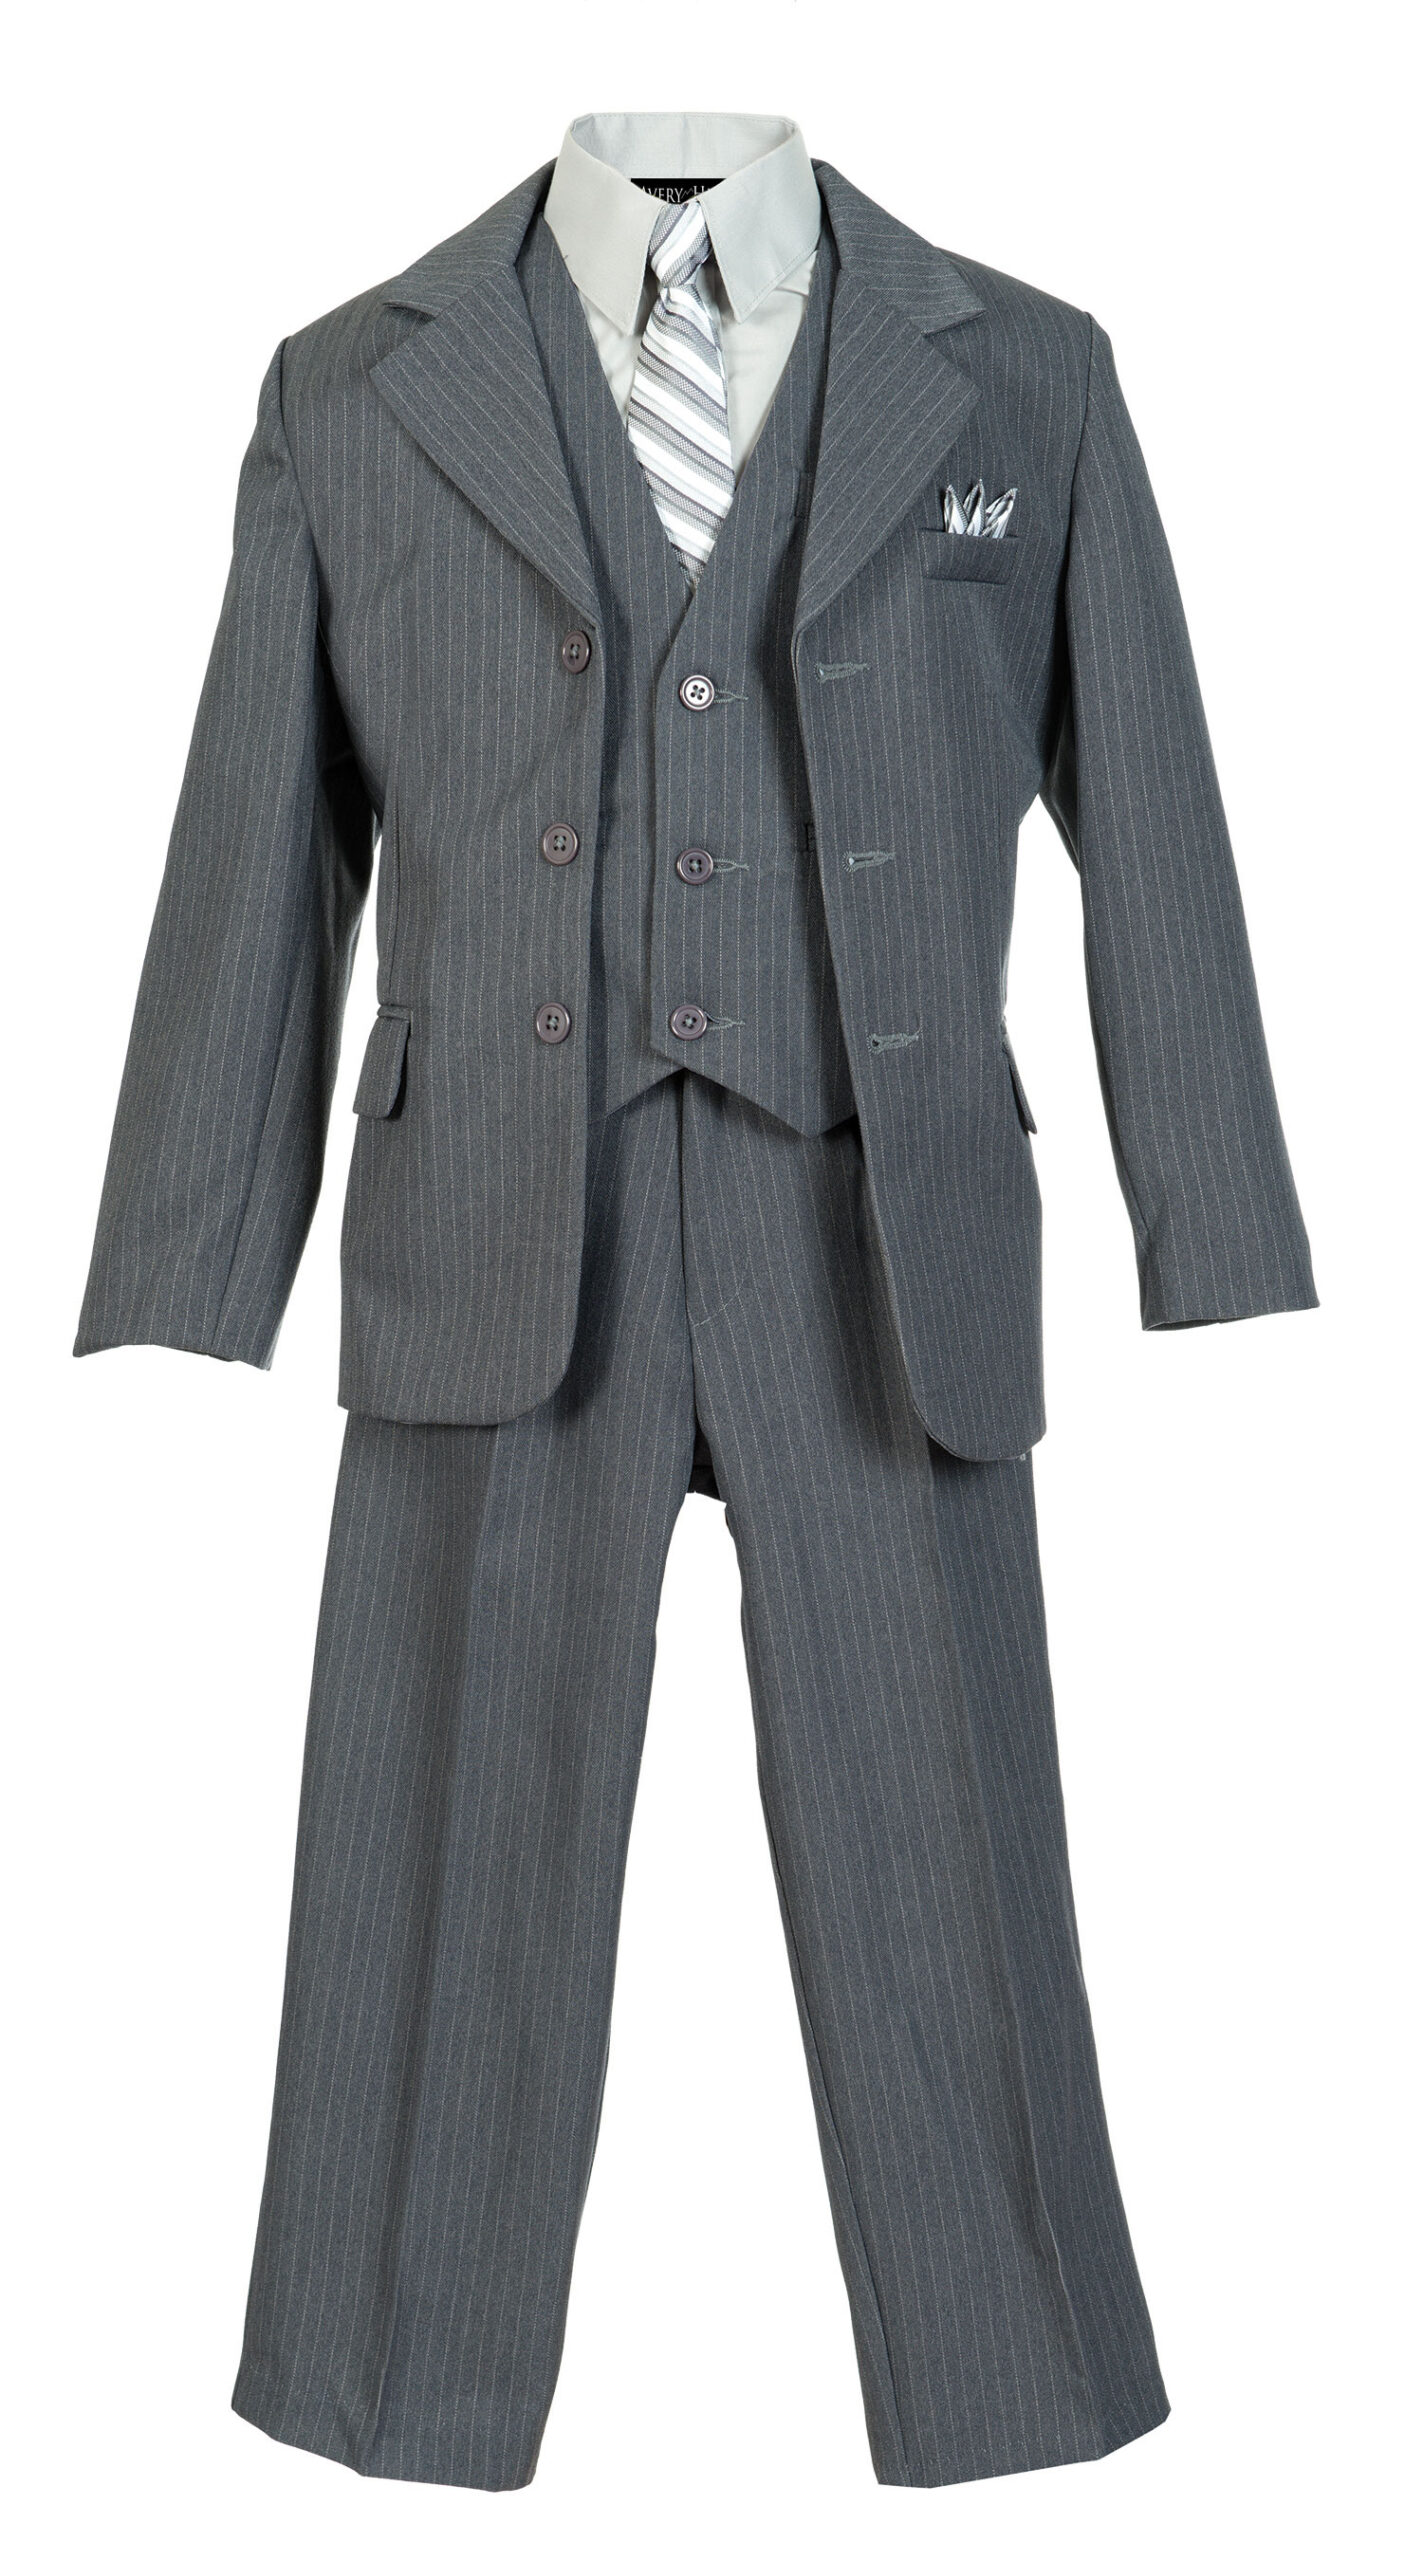 Boys Pinstripe Suit Set with Matching Tie LTGY 7